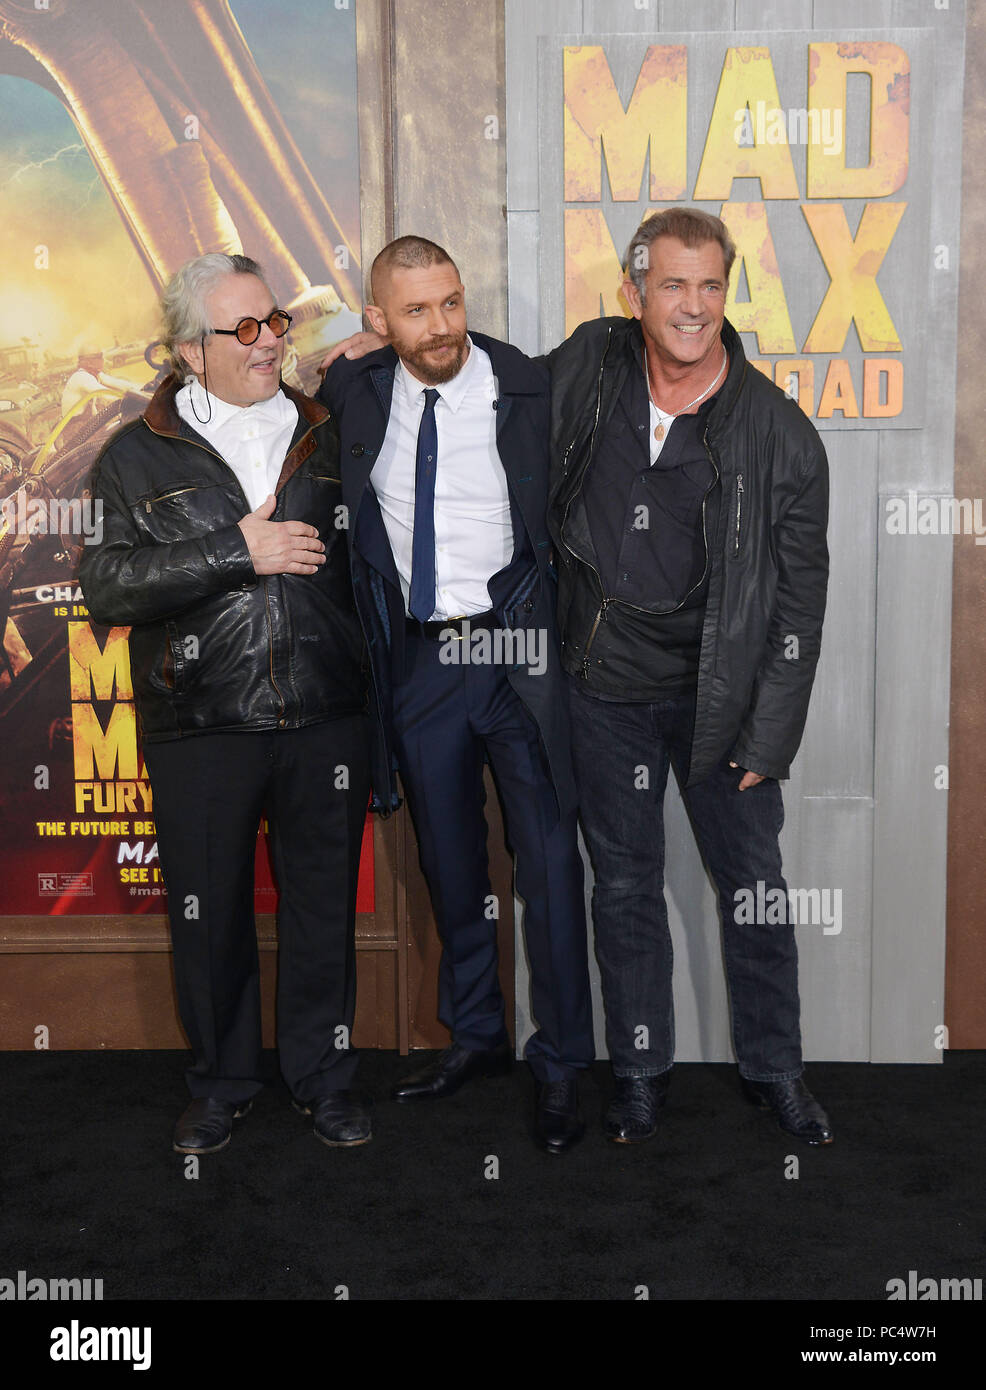 George Miller, Tom Hardy, Mel Gibson 017 arriving at the Mad Max Fury Road Premiere at the TCL Chinese Theatre in Los Angeles. May 7, 2015.George Miller, Tom Hardy, Mel Gibson 017  Event in Hollywood Life - California, Red Carpet Event, USA, Film Industry, Celebrities, Photography, Bestof, Arts Culture and Entertainment, Topix Celebrities fashion, Best of, Hollywood Life, Event in Hollywood Life - California, Red Carpet and backstage, movie celebrities, TV celebrities, Music celebrities, Arts Culture and Entertainment, vertical, one person, Photography,    inquiry tsuni@Gamma-USA.com , Credit  Stock Photo